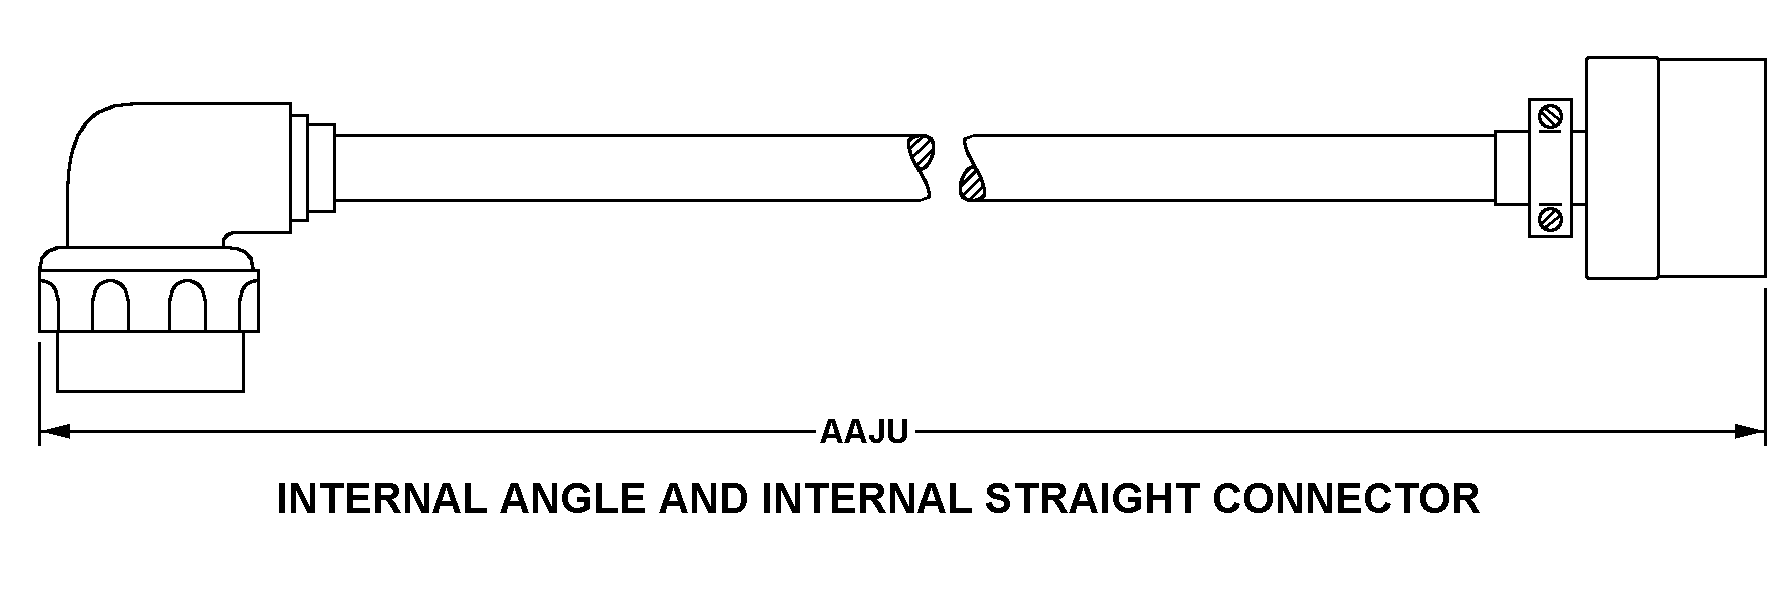 INTERNAL ANGLE AND INTERNAL STRAIGHT CONNECTOR style nsn 5995-01-276-7732